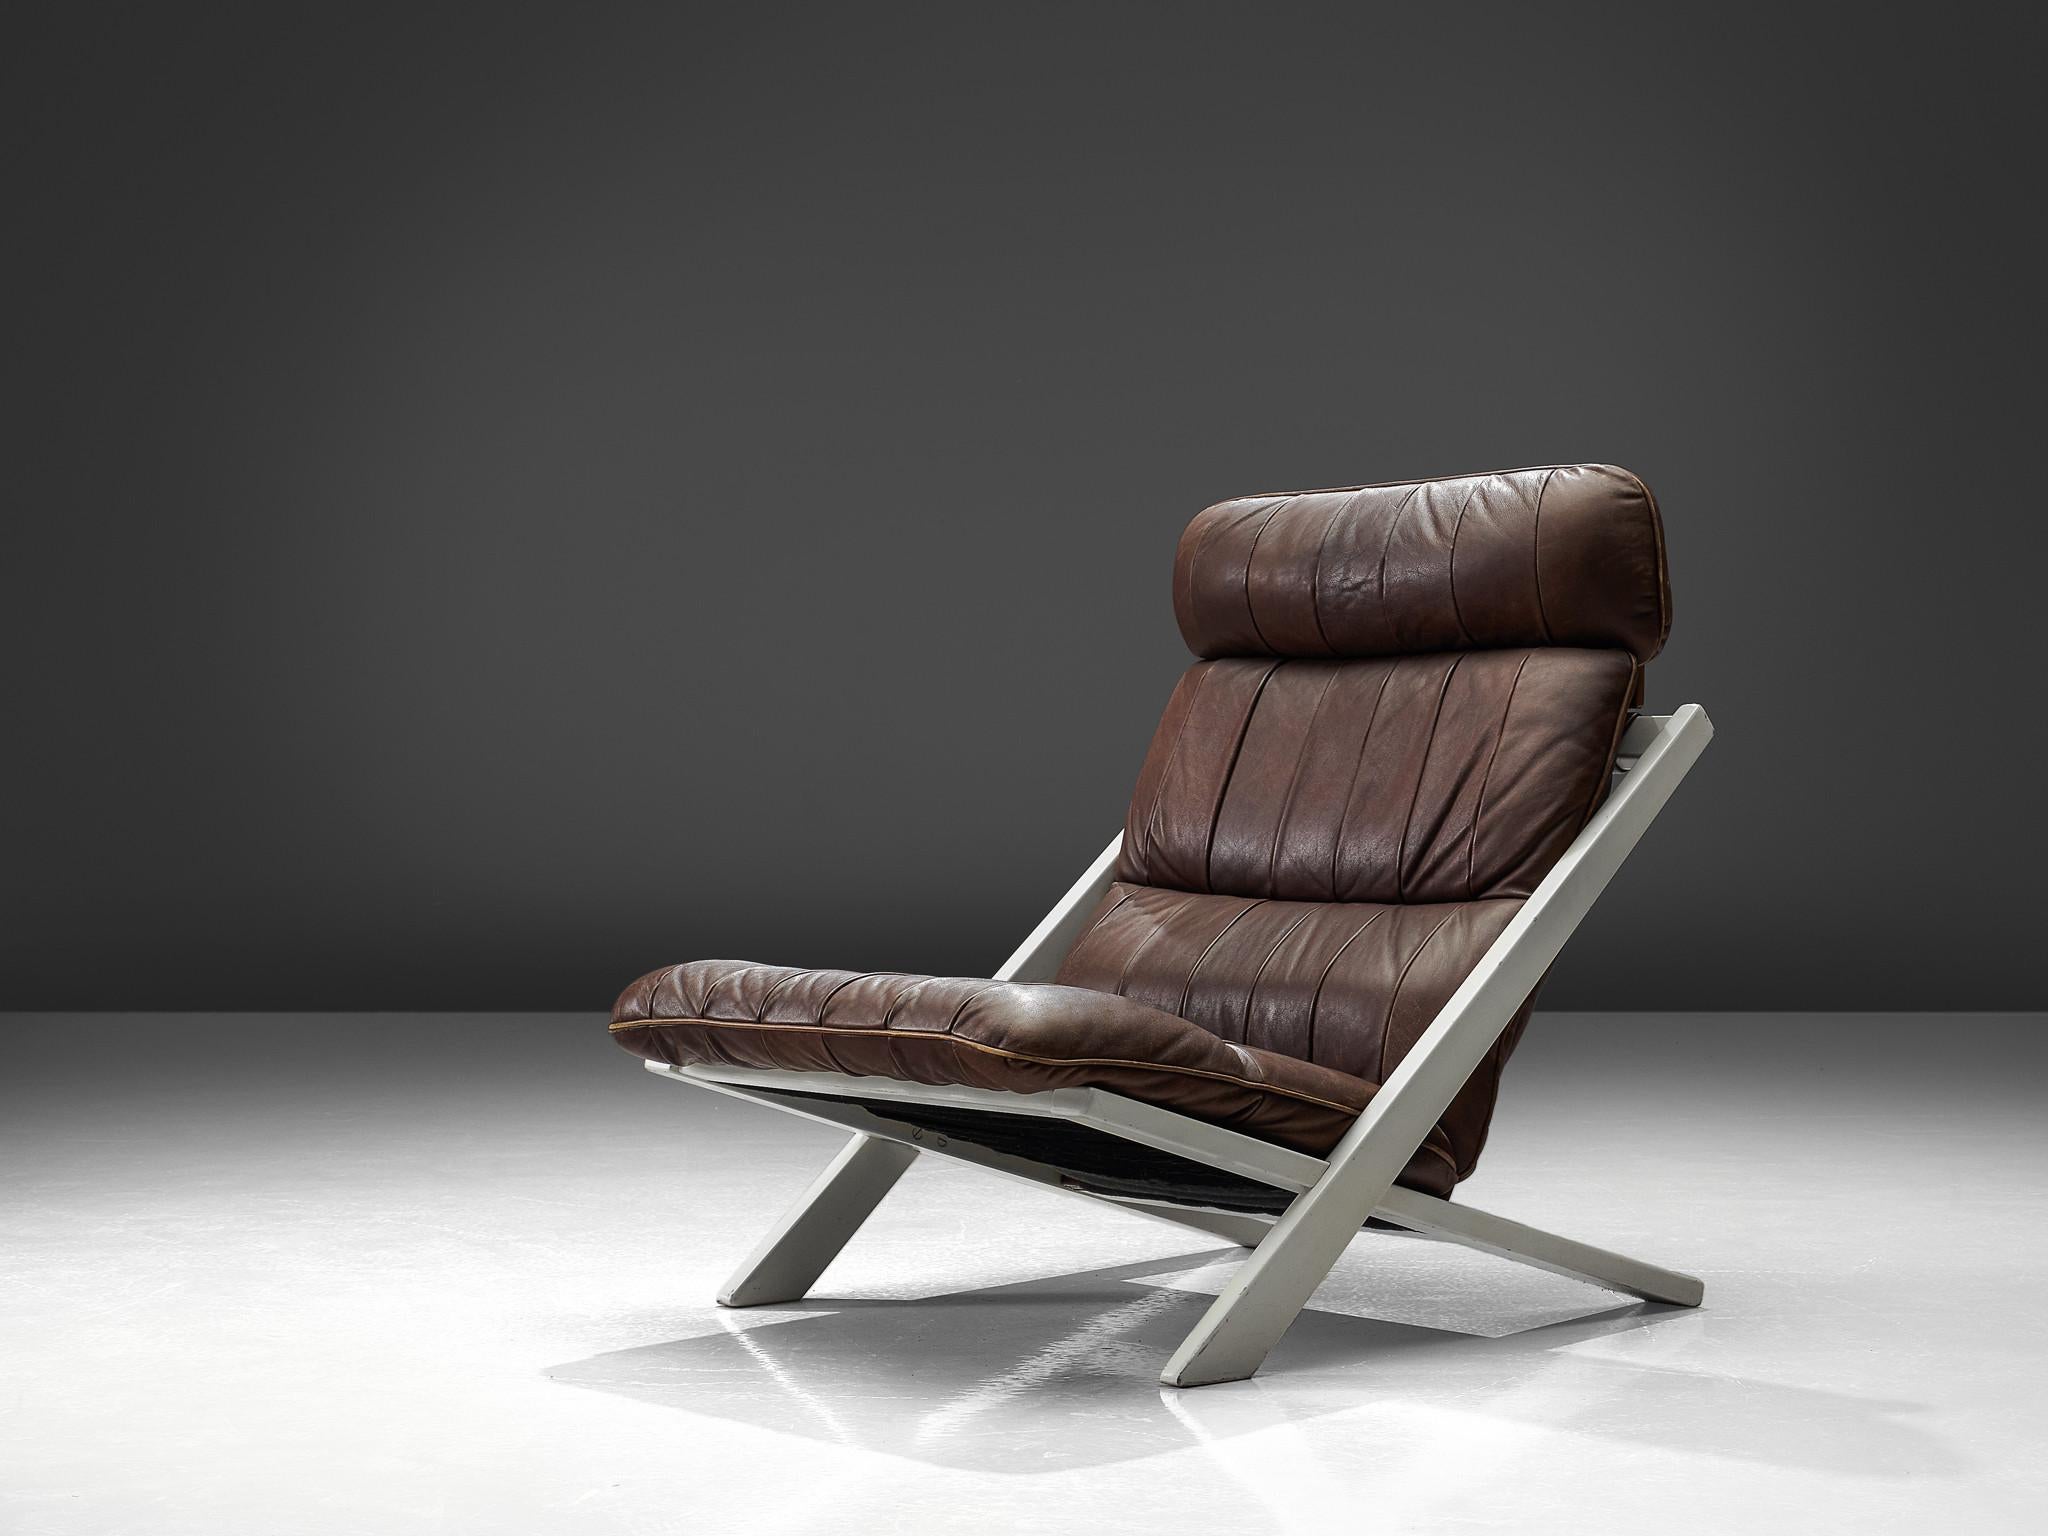 Ueli bergère for De Sede, lounge chair, Switzerland, 1970s.

High back lounge chair by de Swiss quality manufacturer De Sede. The X-shaped frame consists of black lacquered wood. This makes an interesting contrast to the warm patinated cognac brown